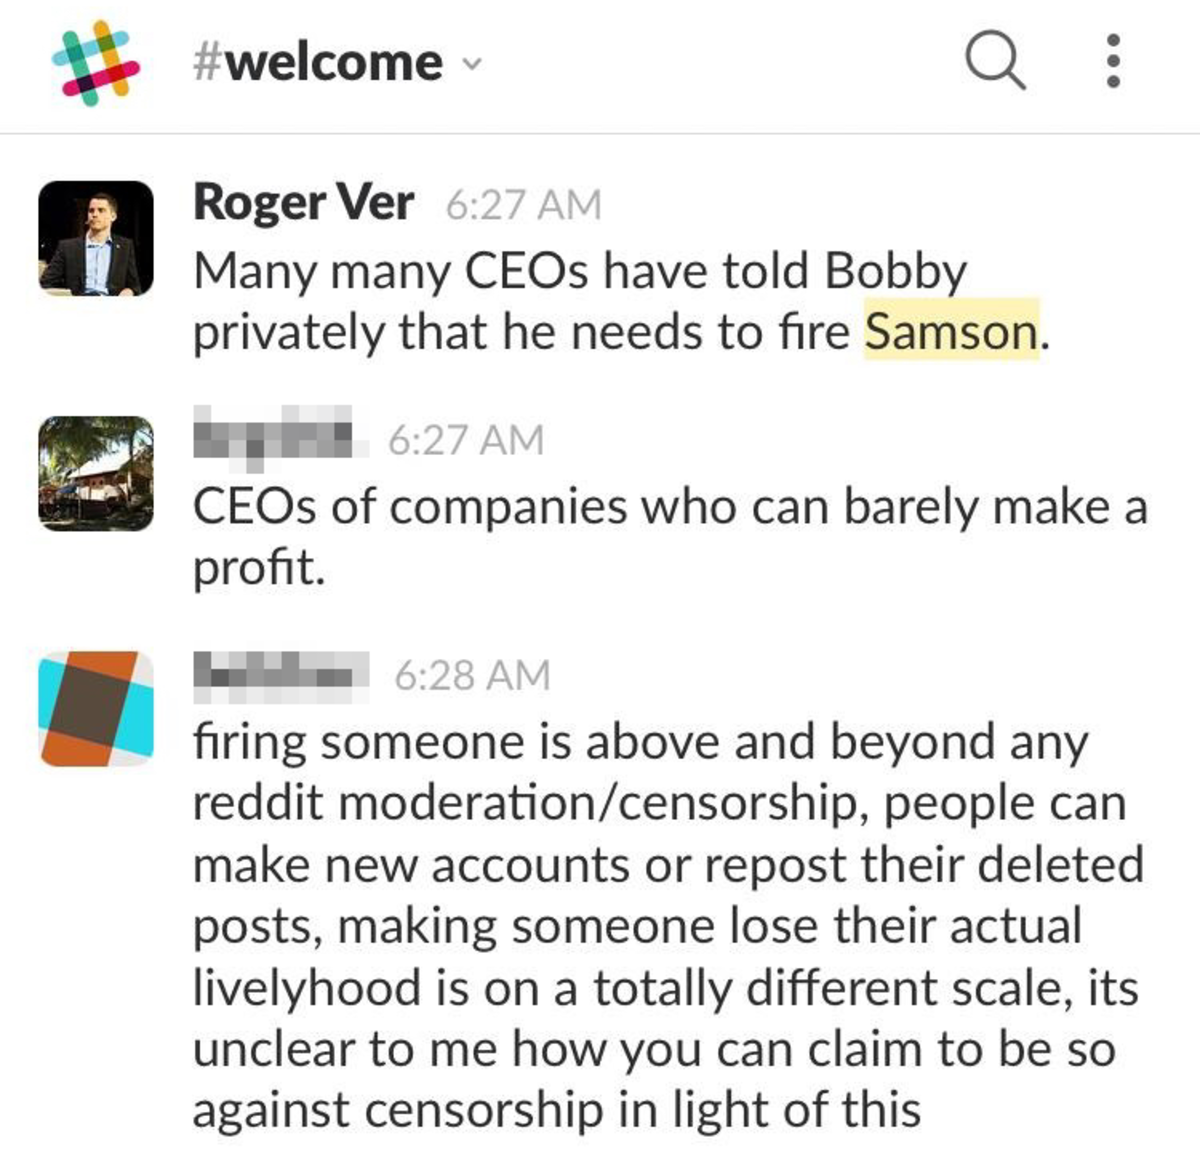 Samson Mow recounts the Blocksize War between Big and Small Blockers and takes stock of the companies on the losing side of Bitcoin’s first civil war.